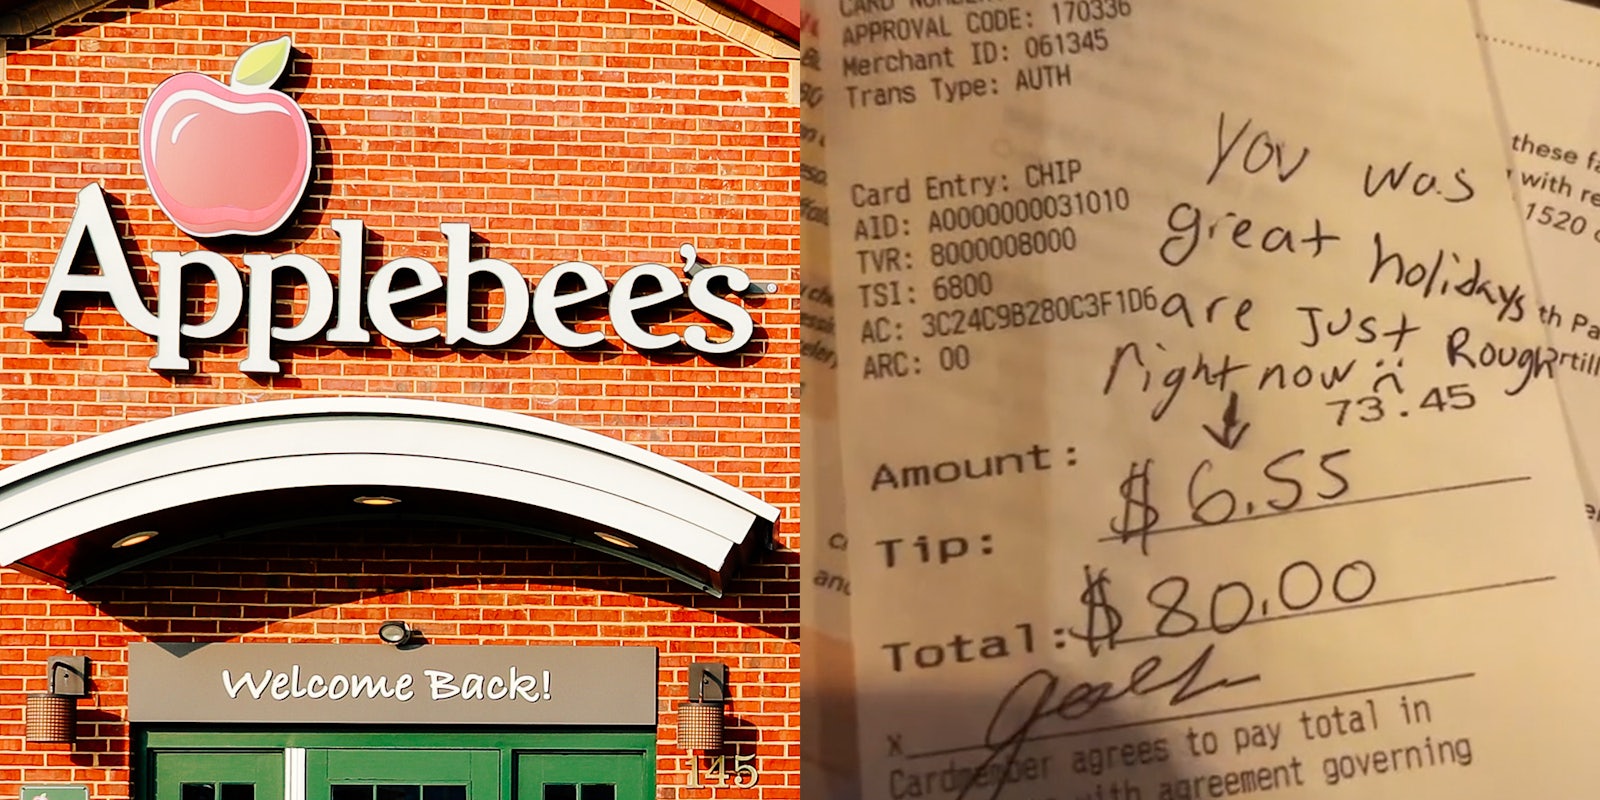 Applebee's restaurant (l) receipt with amount $73.45, tip $6.55 with handwritten note 'You was great holidays are just rough right now :('